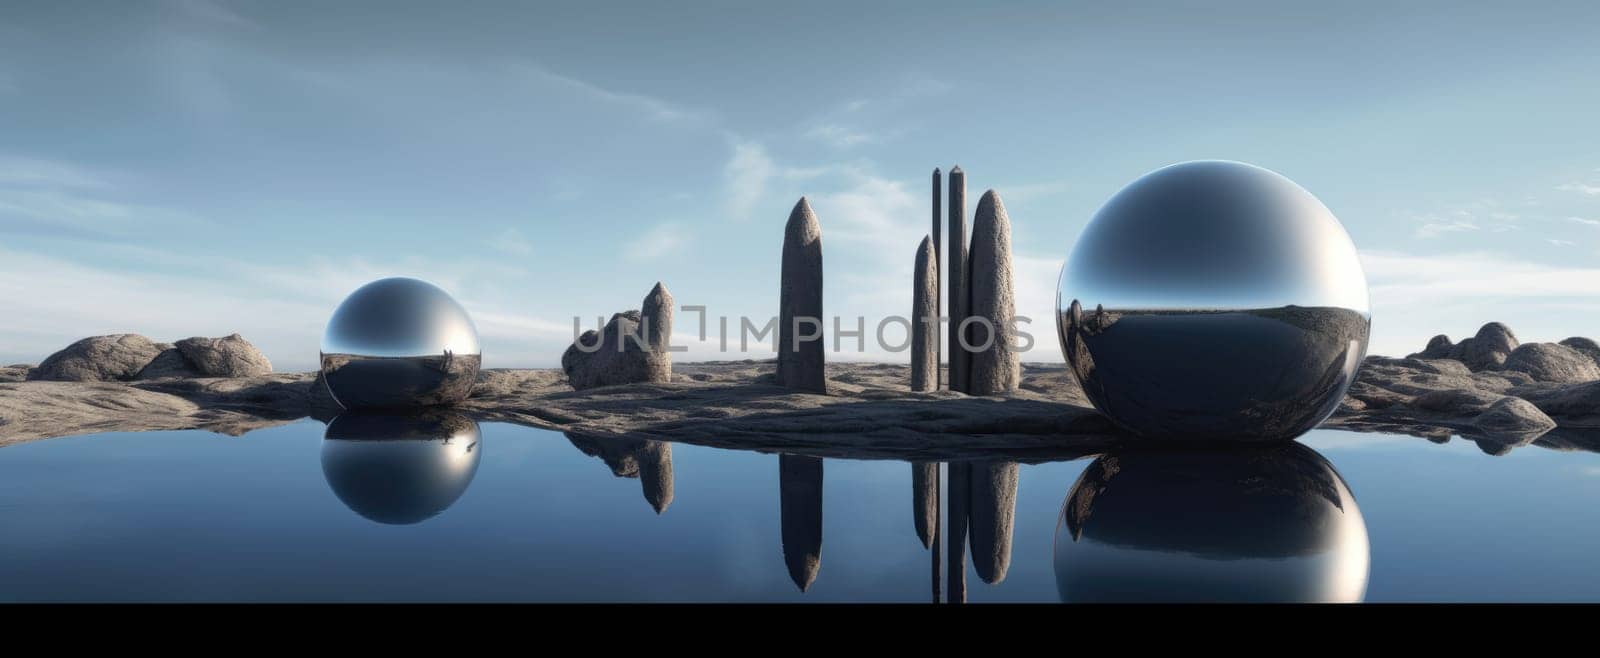 Futuristic background of abstract architecture and water. Beautiful background for your design